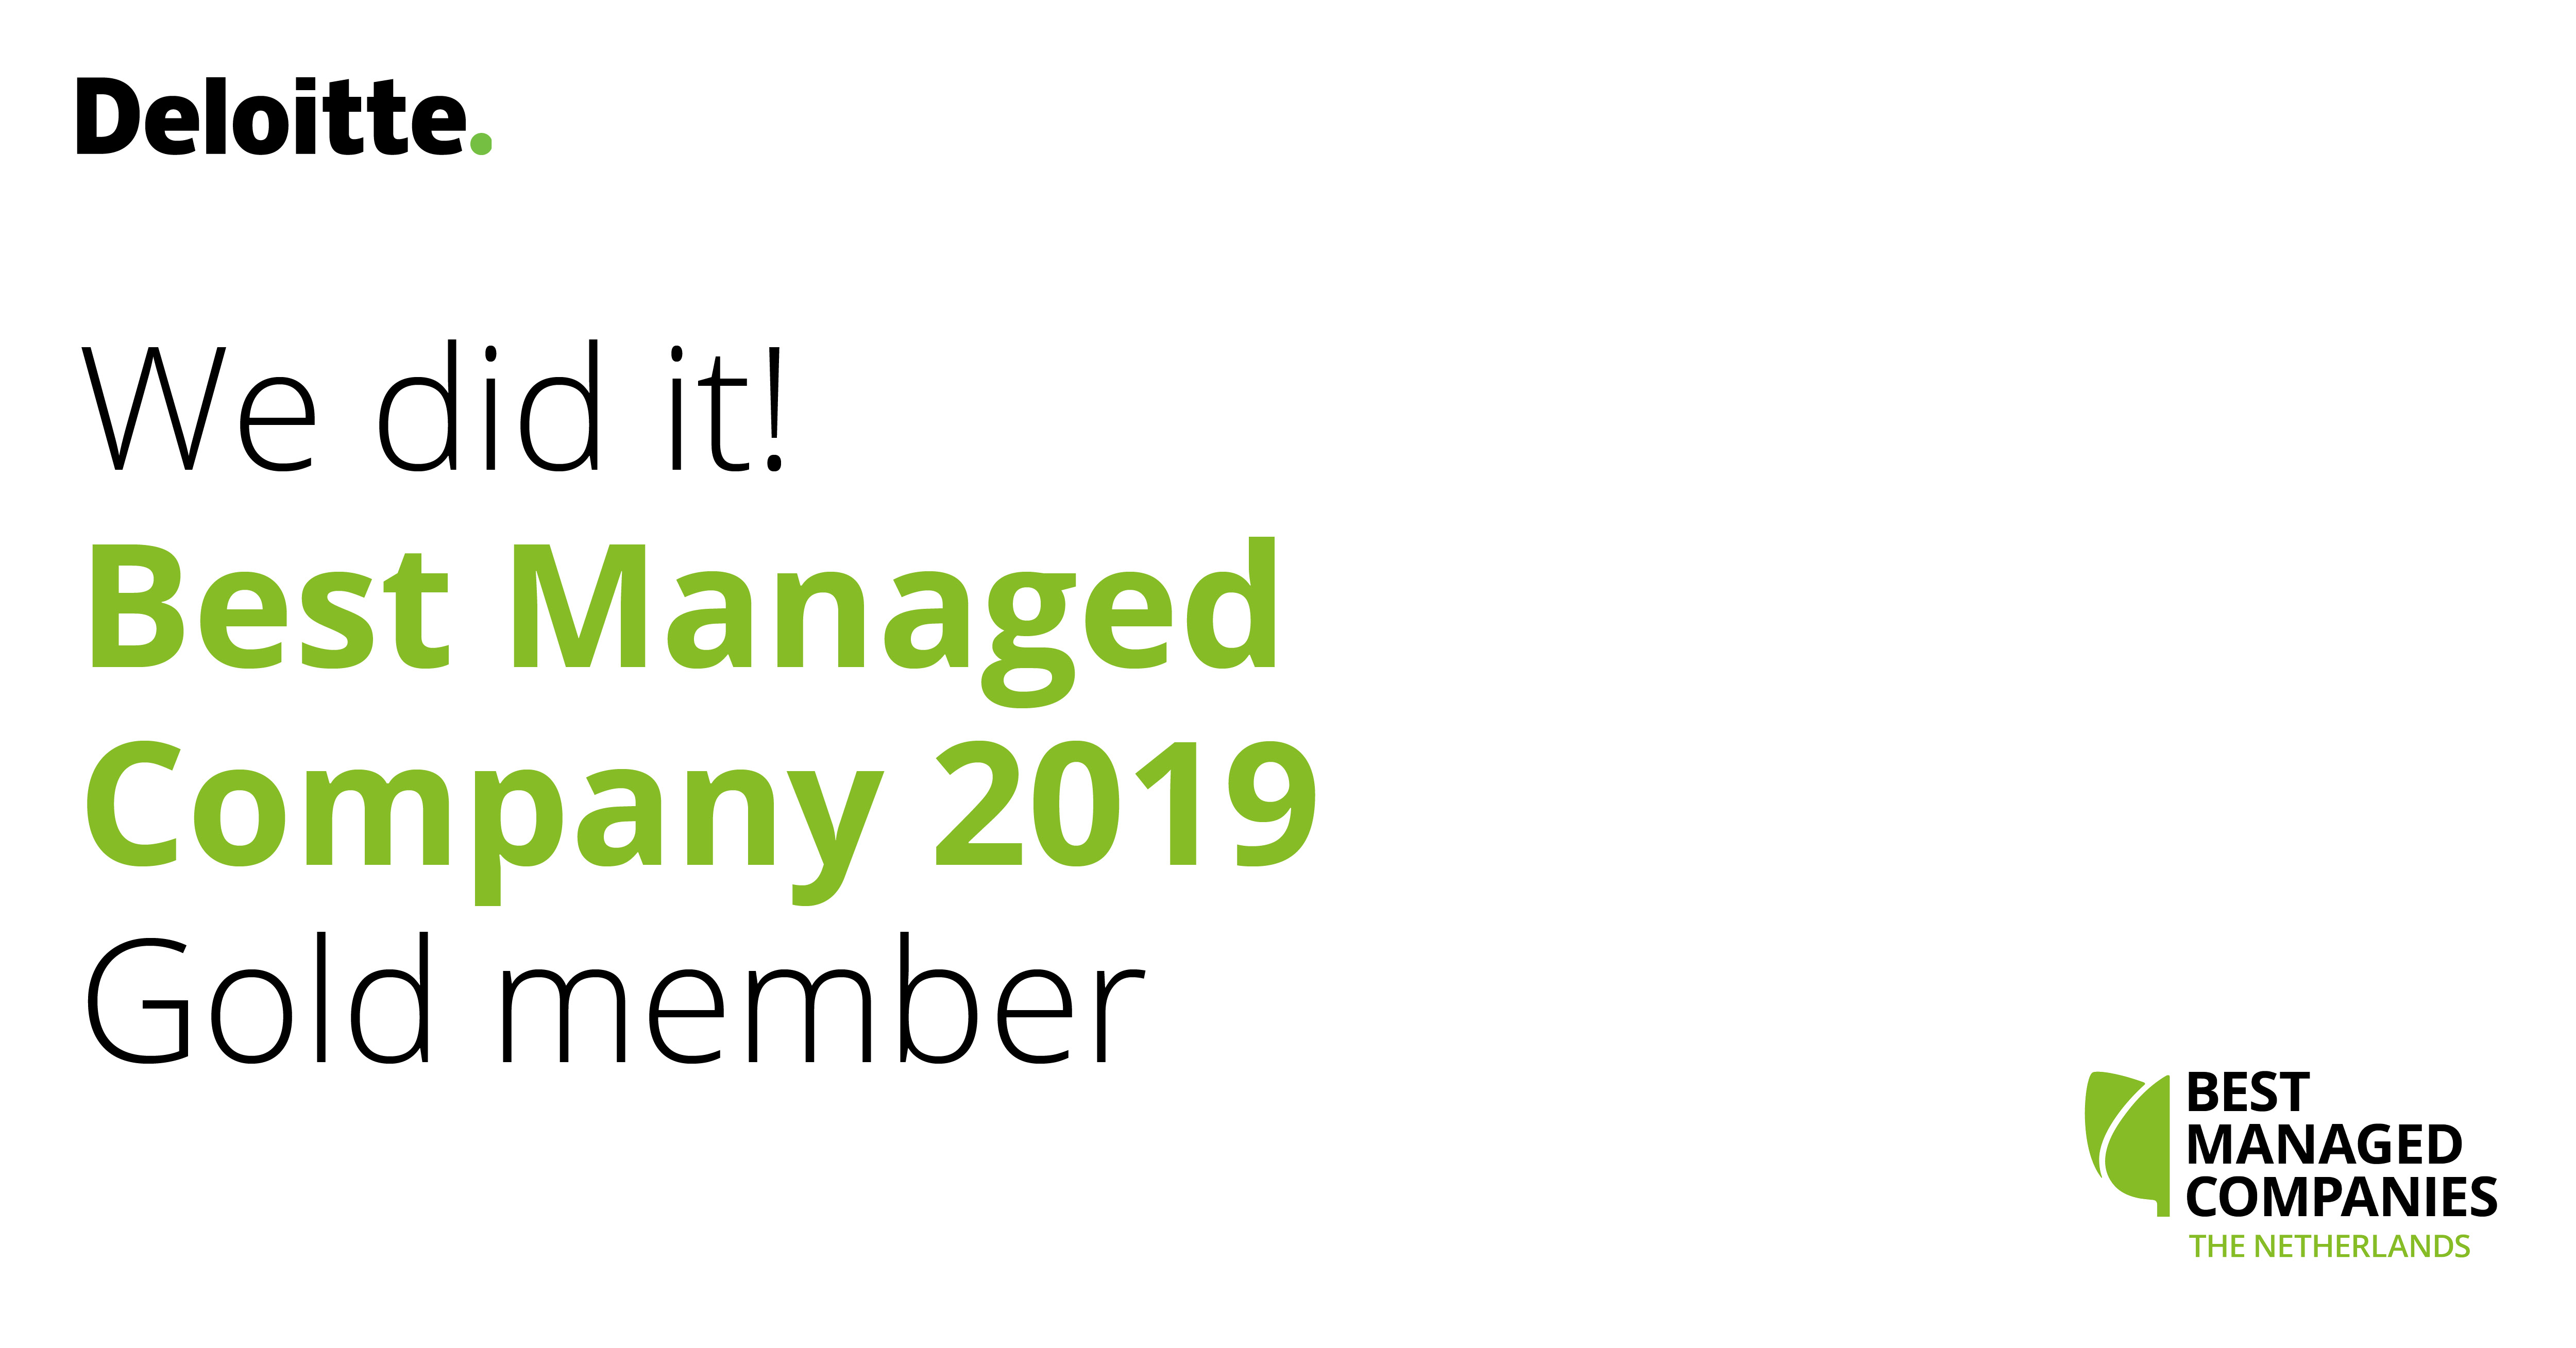 Best Managed Company 2019